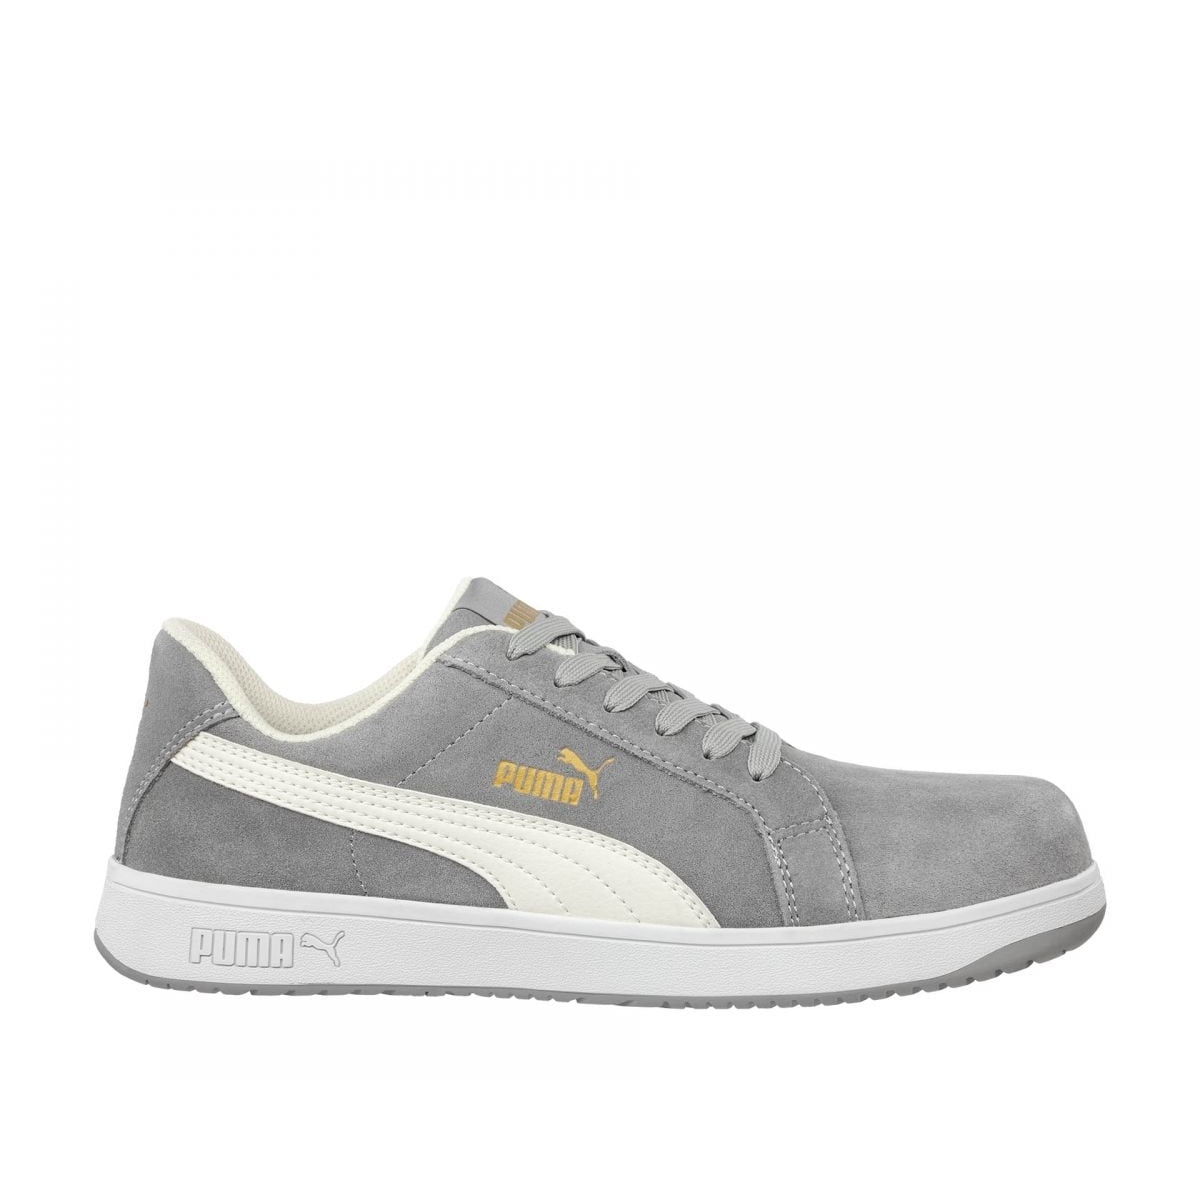 PUMA Safety Men's Iconic Suede Low SD Work Shoes Toe Slip Resistant - Walmart.com